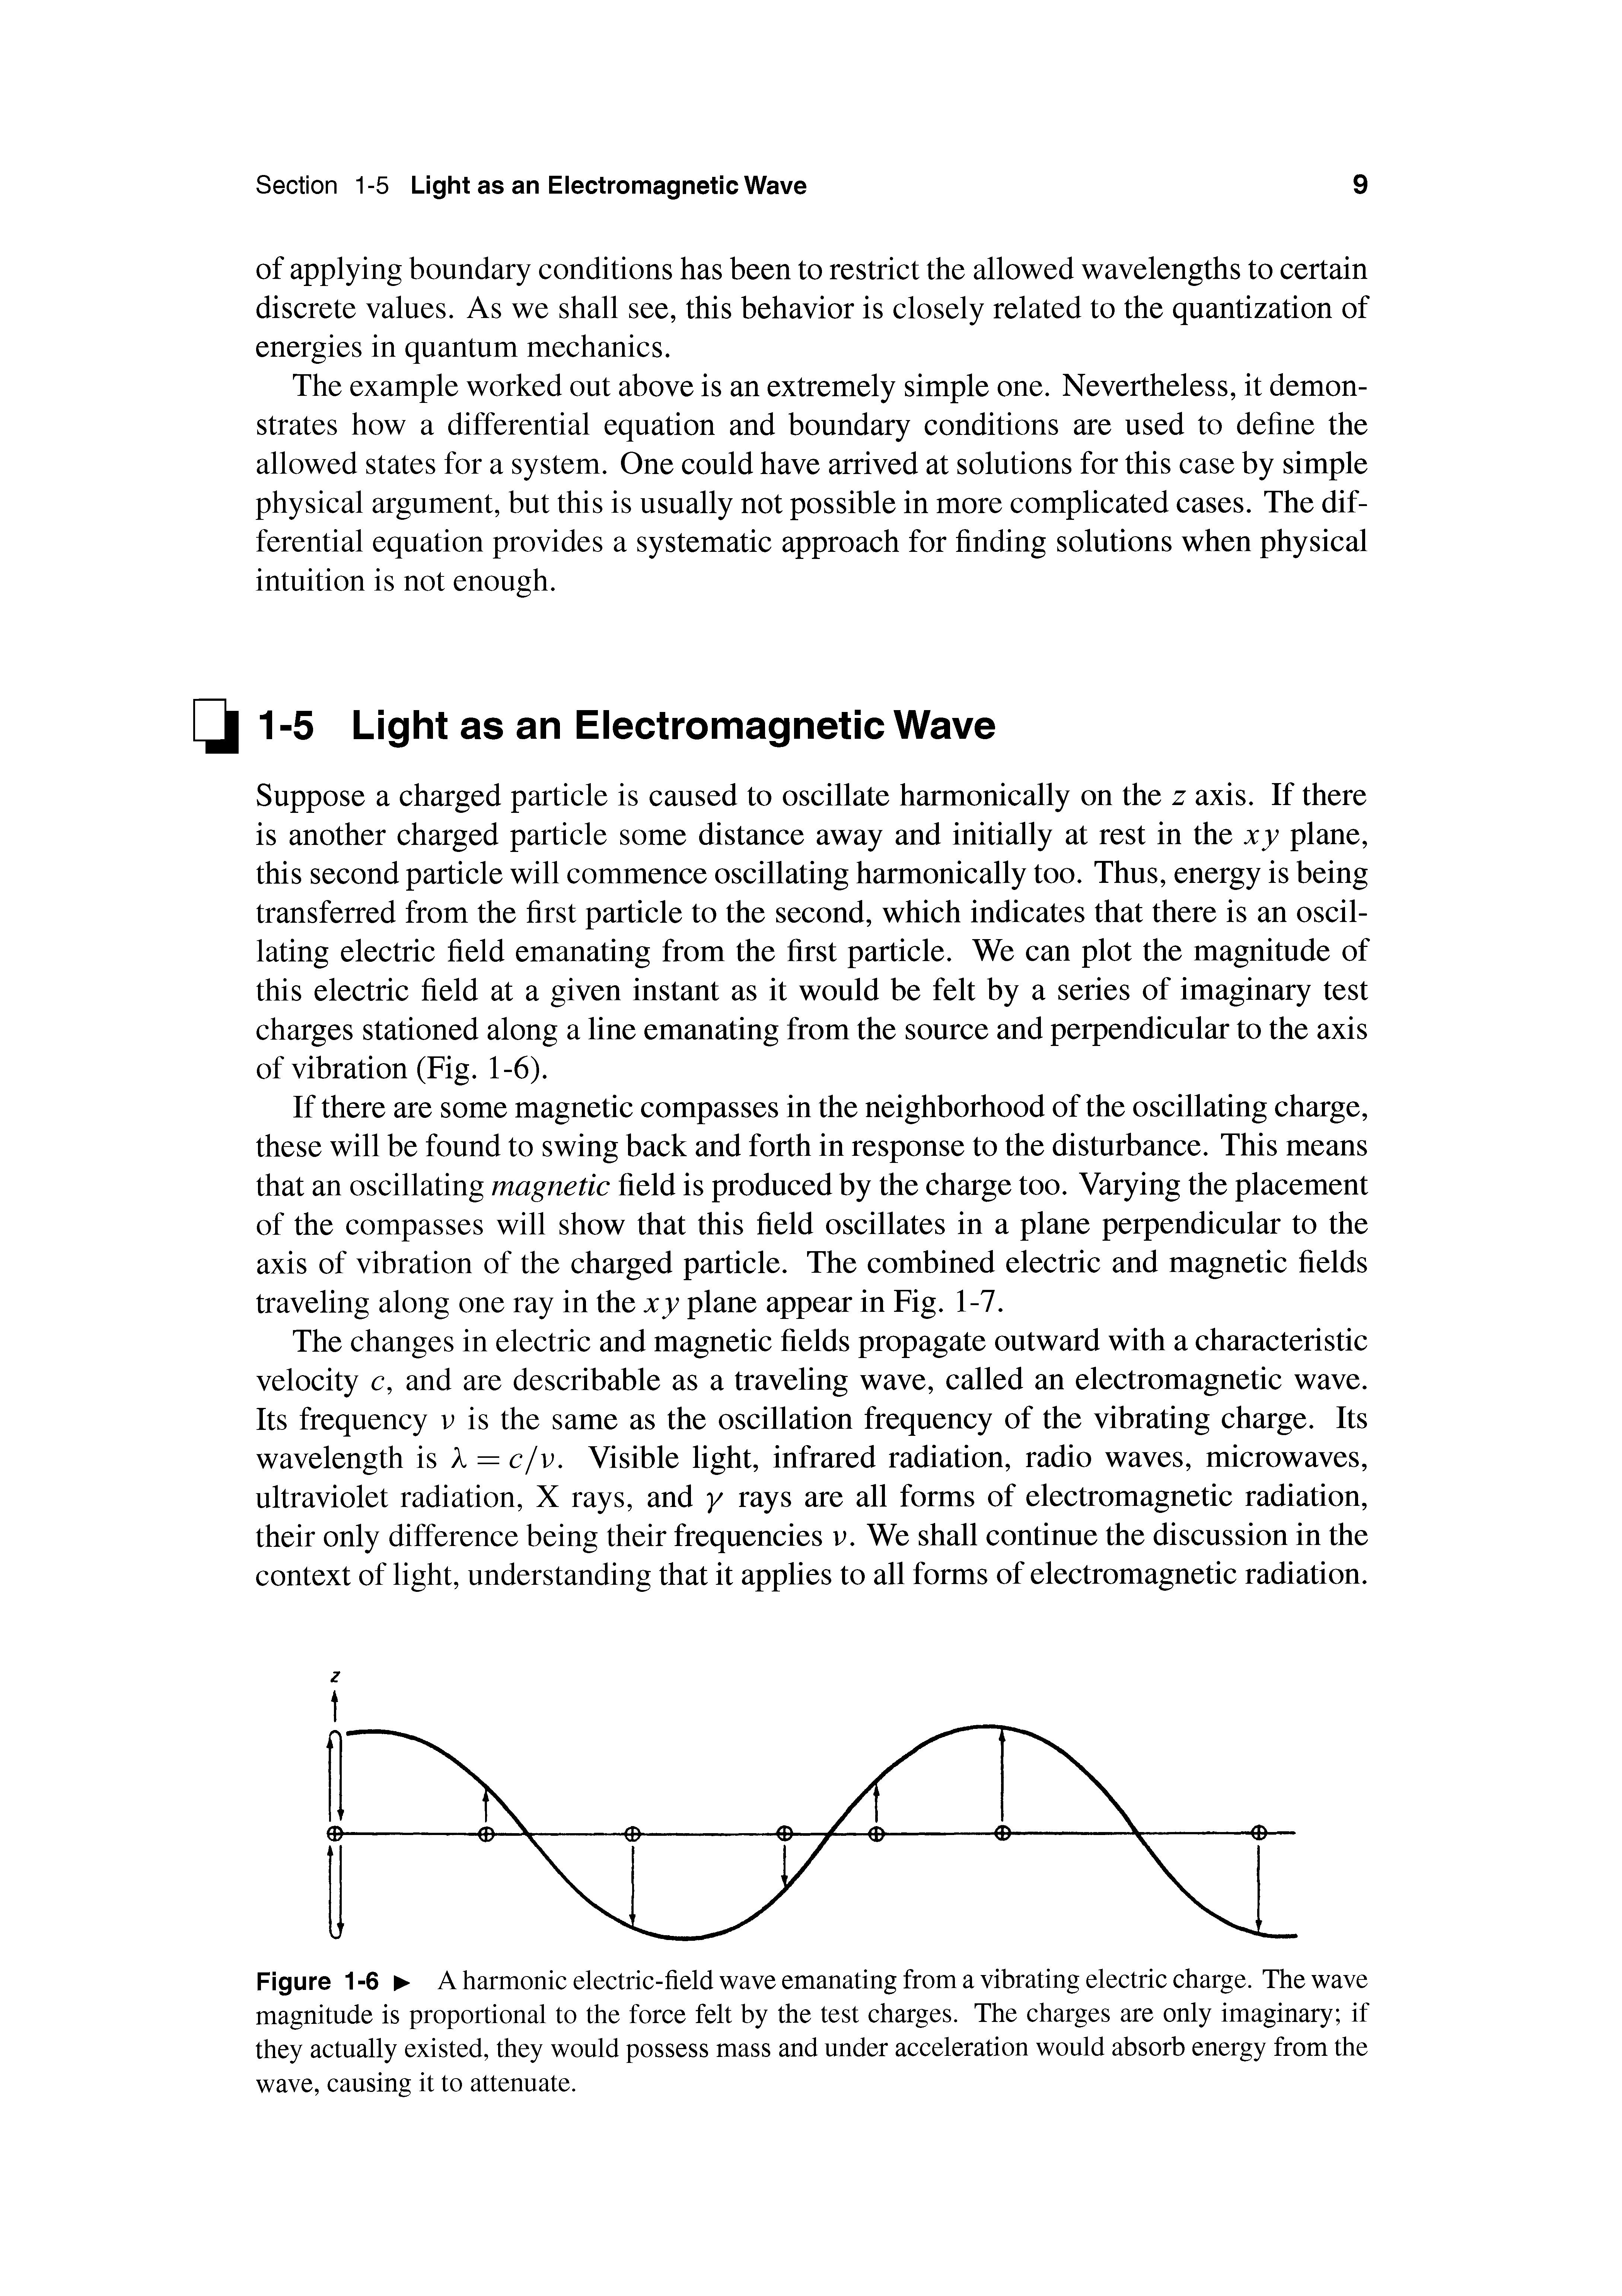 Figure 1 -6 A harmonic electric-field wave emanating from a vibrating electric charge. The wave magnitude is proportional to the force felt by the test charges. The charges are only imaginary if they actually existed, they would possess mass and under acceleration would absorb energy from the wave, causing it to attenuate.